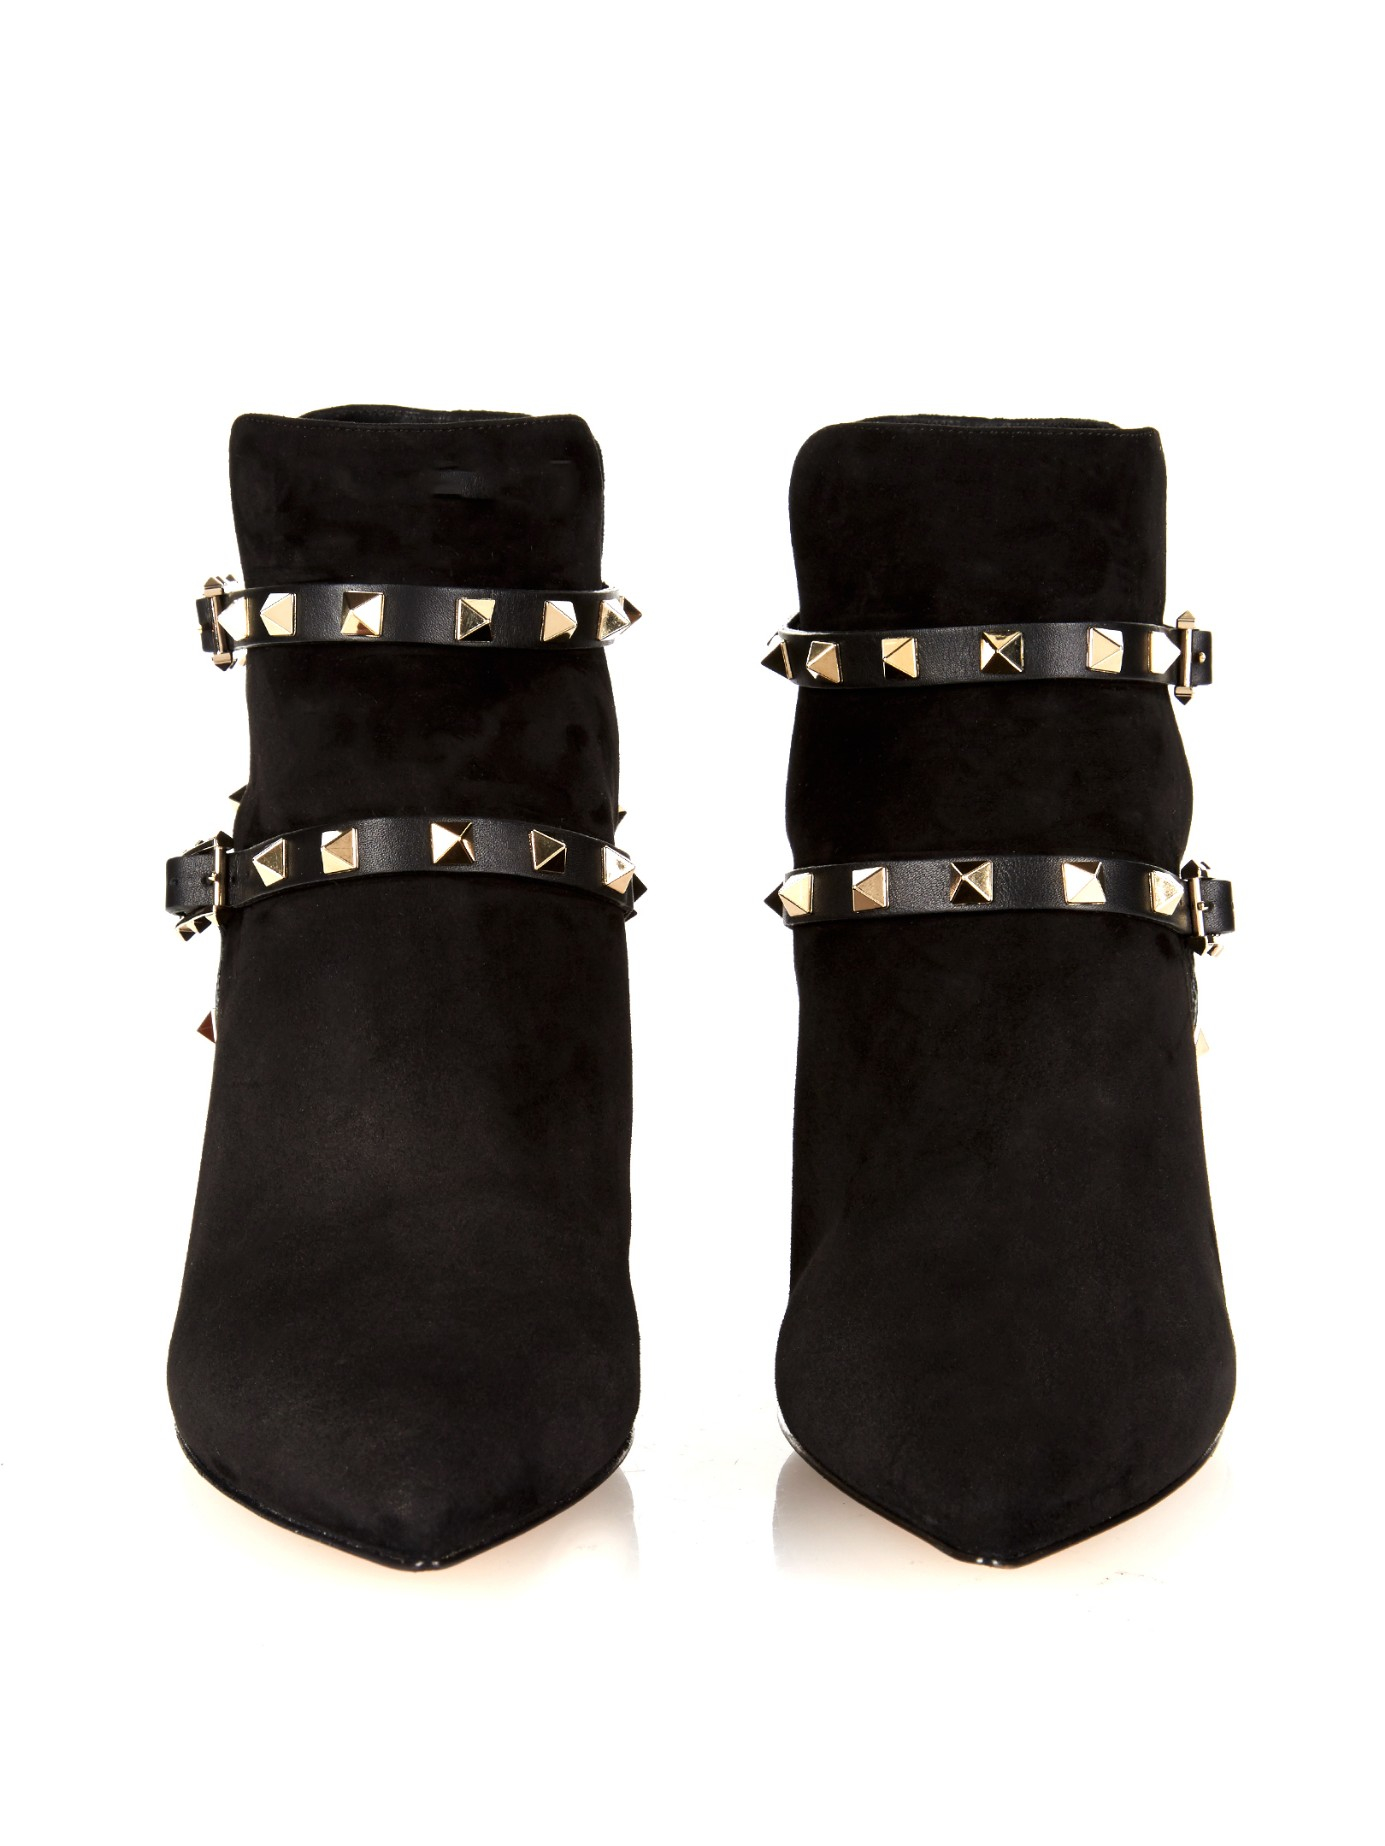 Valentino Rockstud Suede Ankle Boots in Black - Lyst